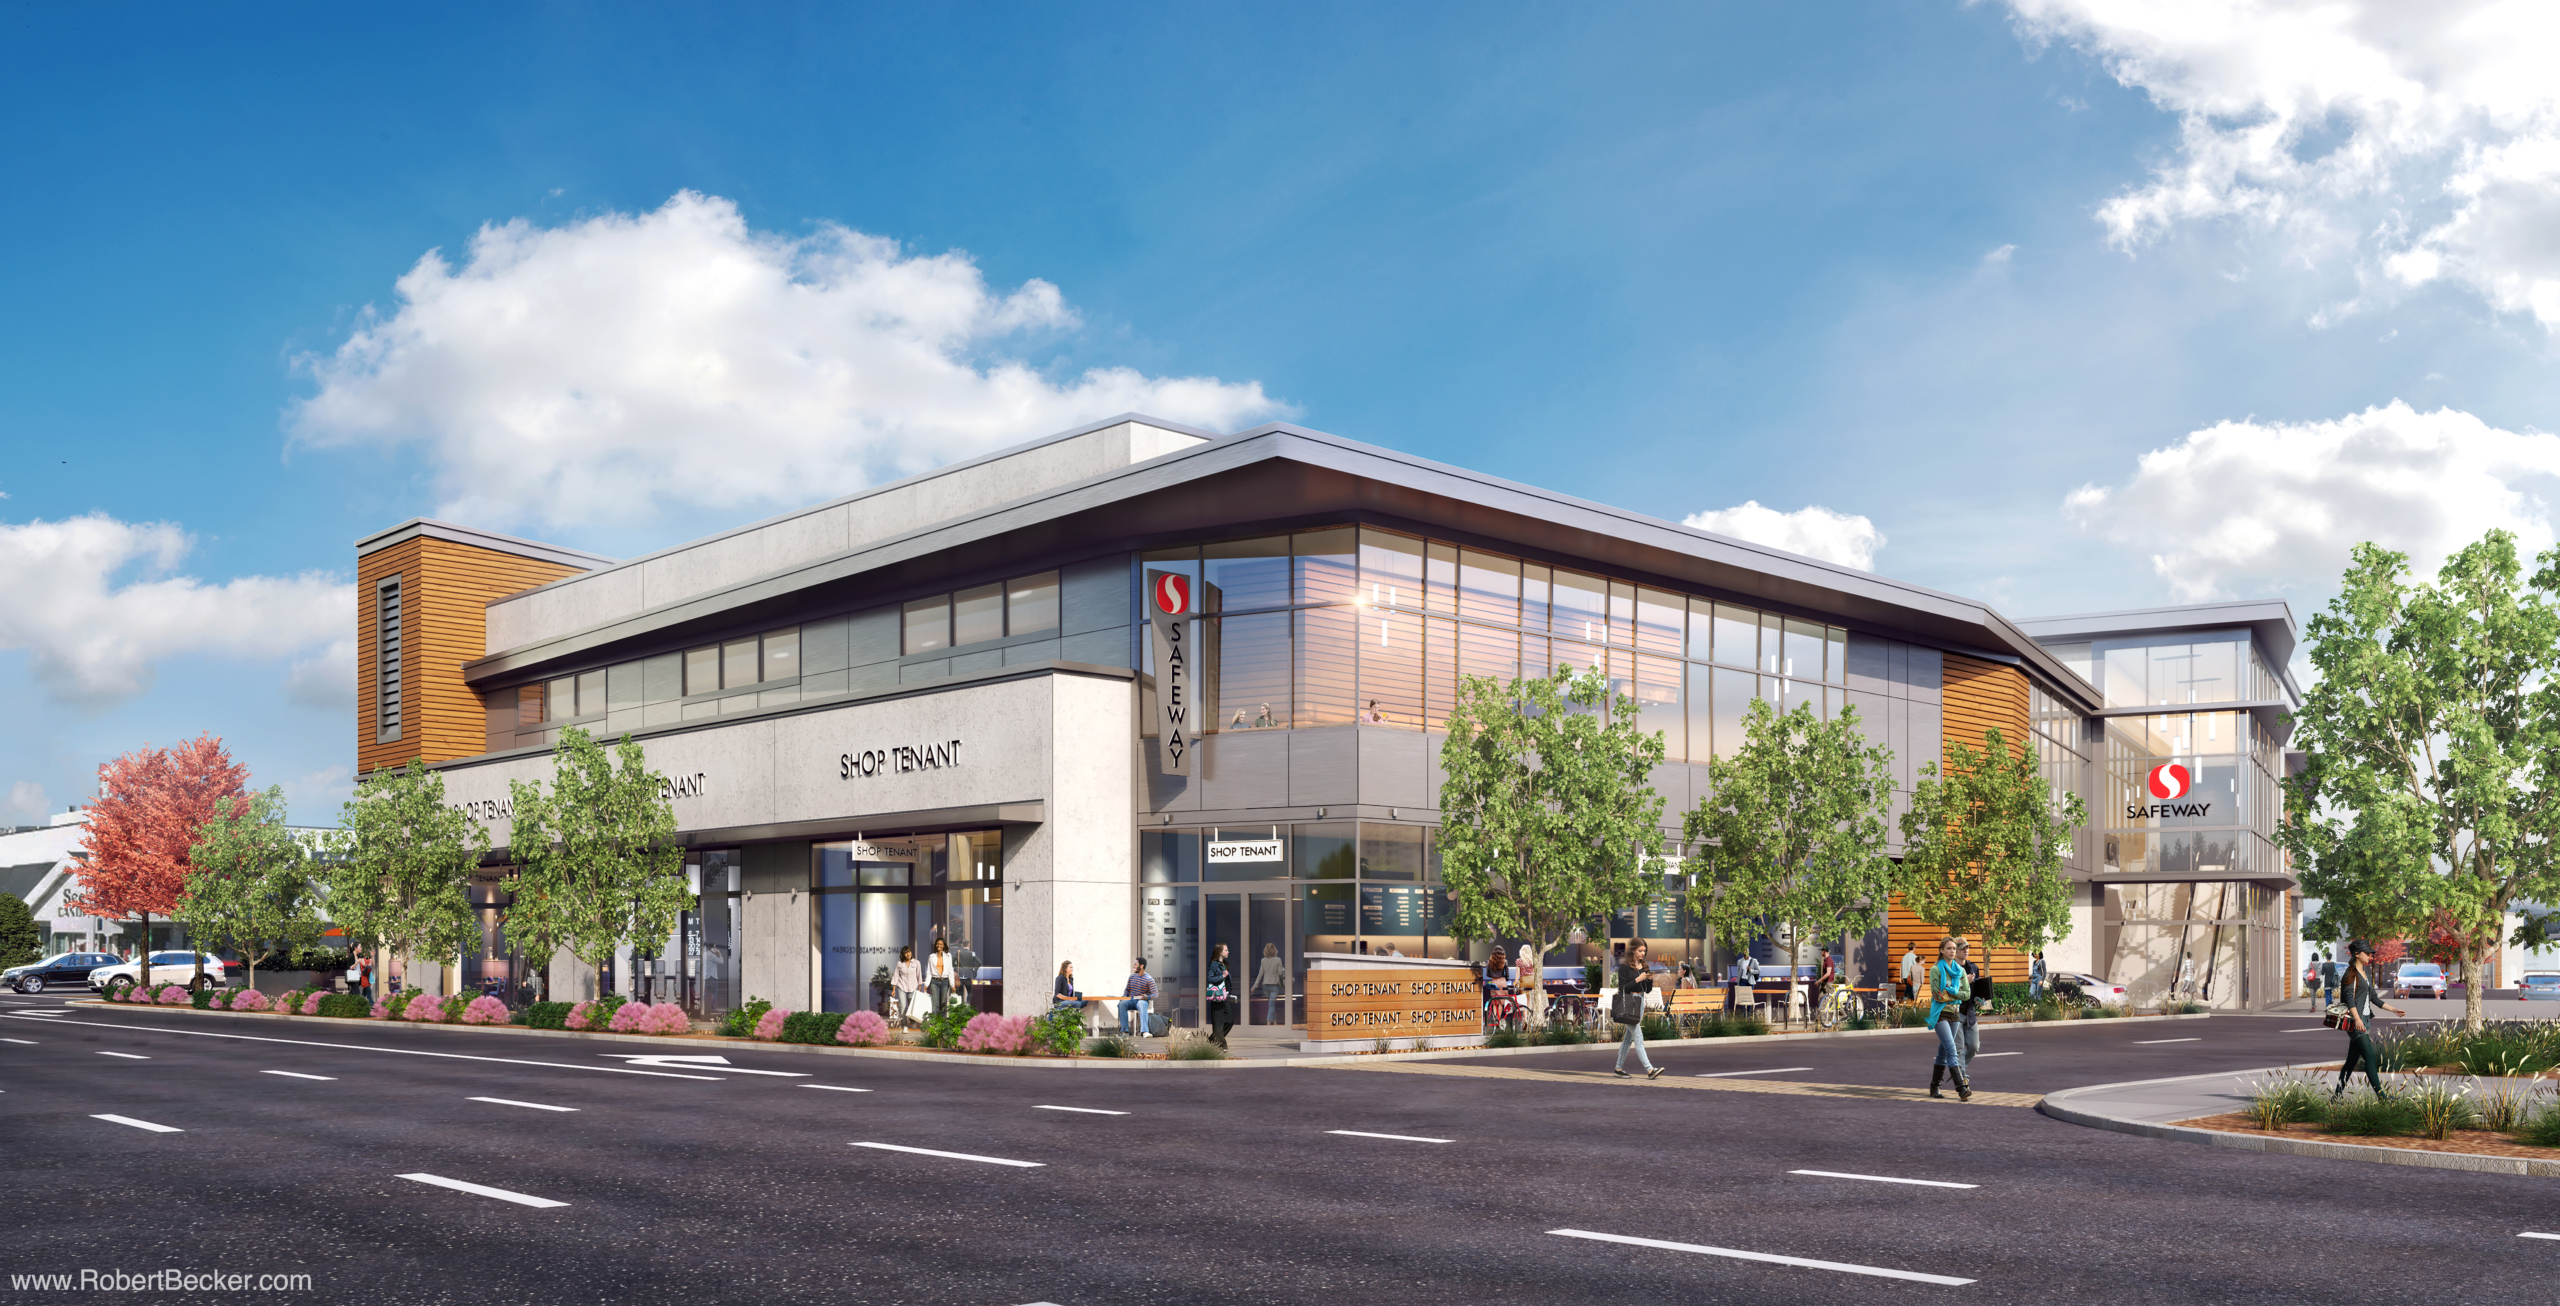 retail architectural rendering